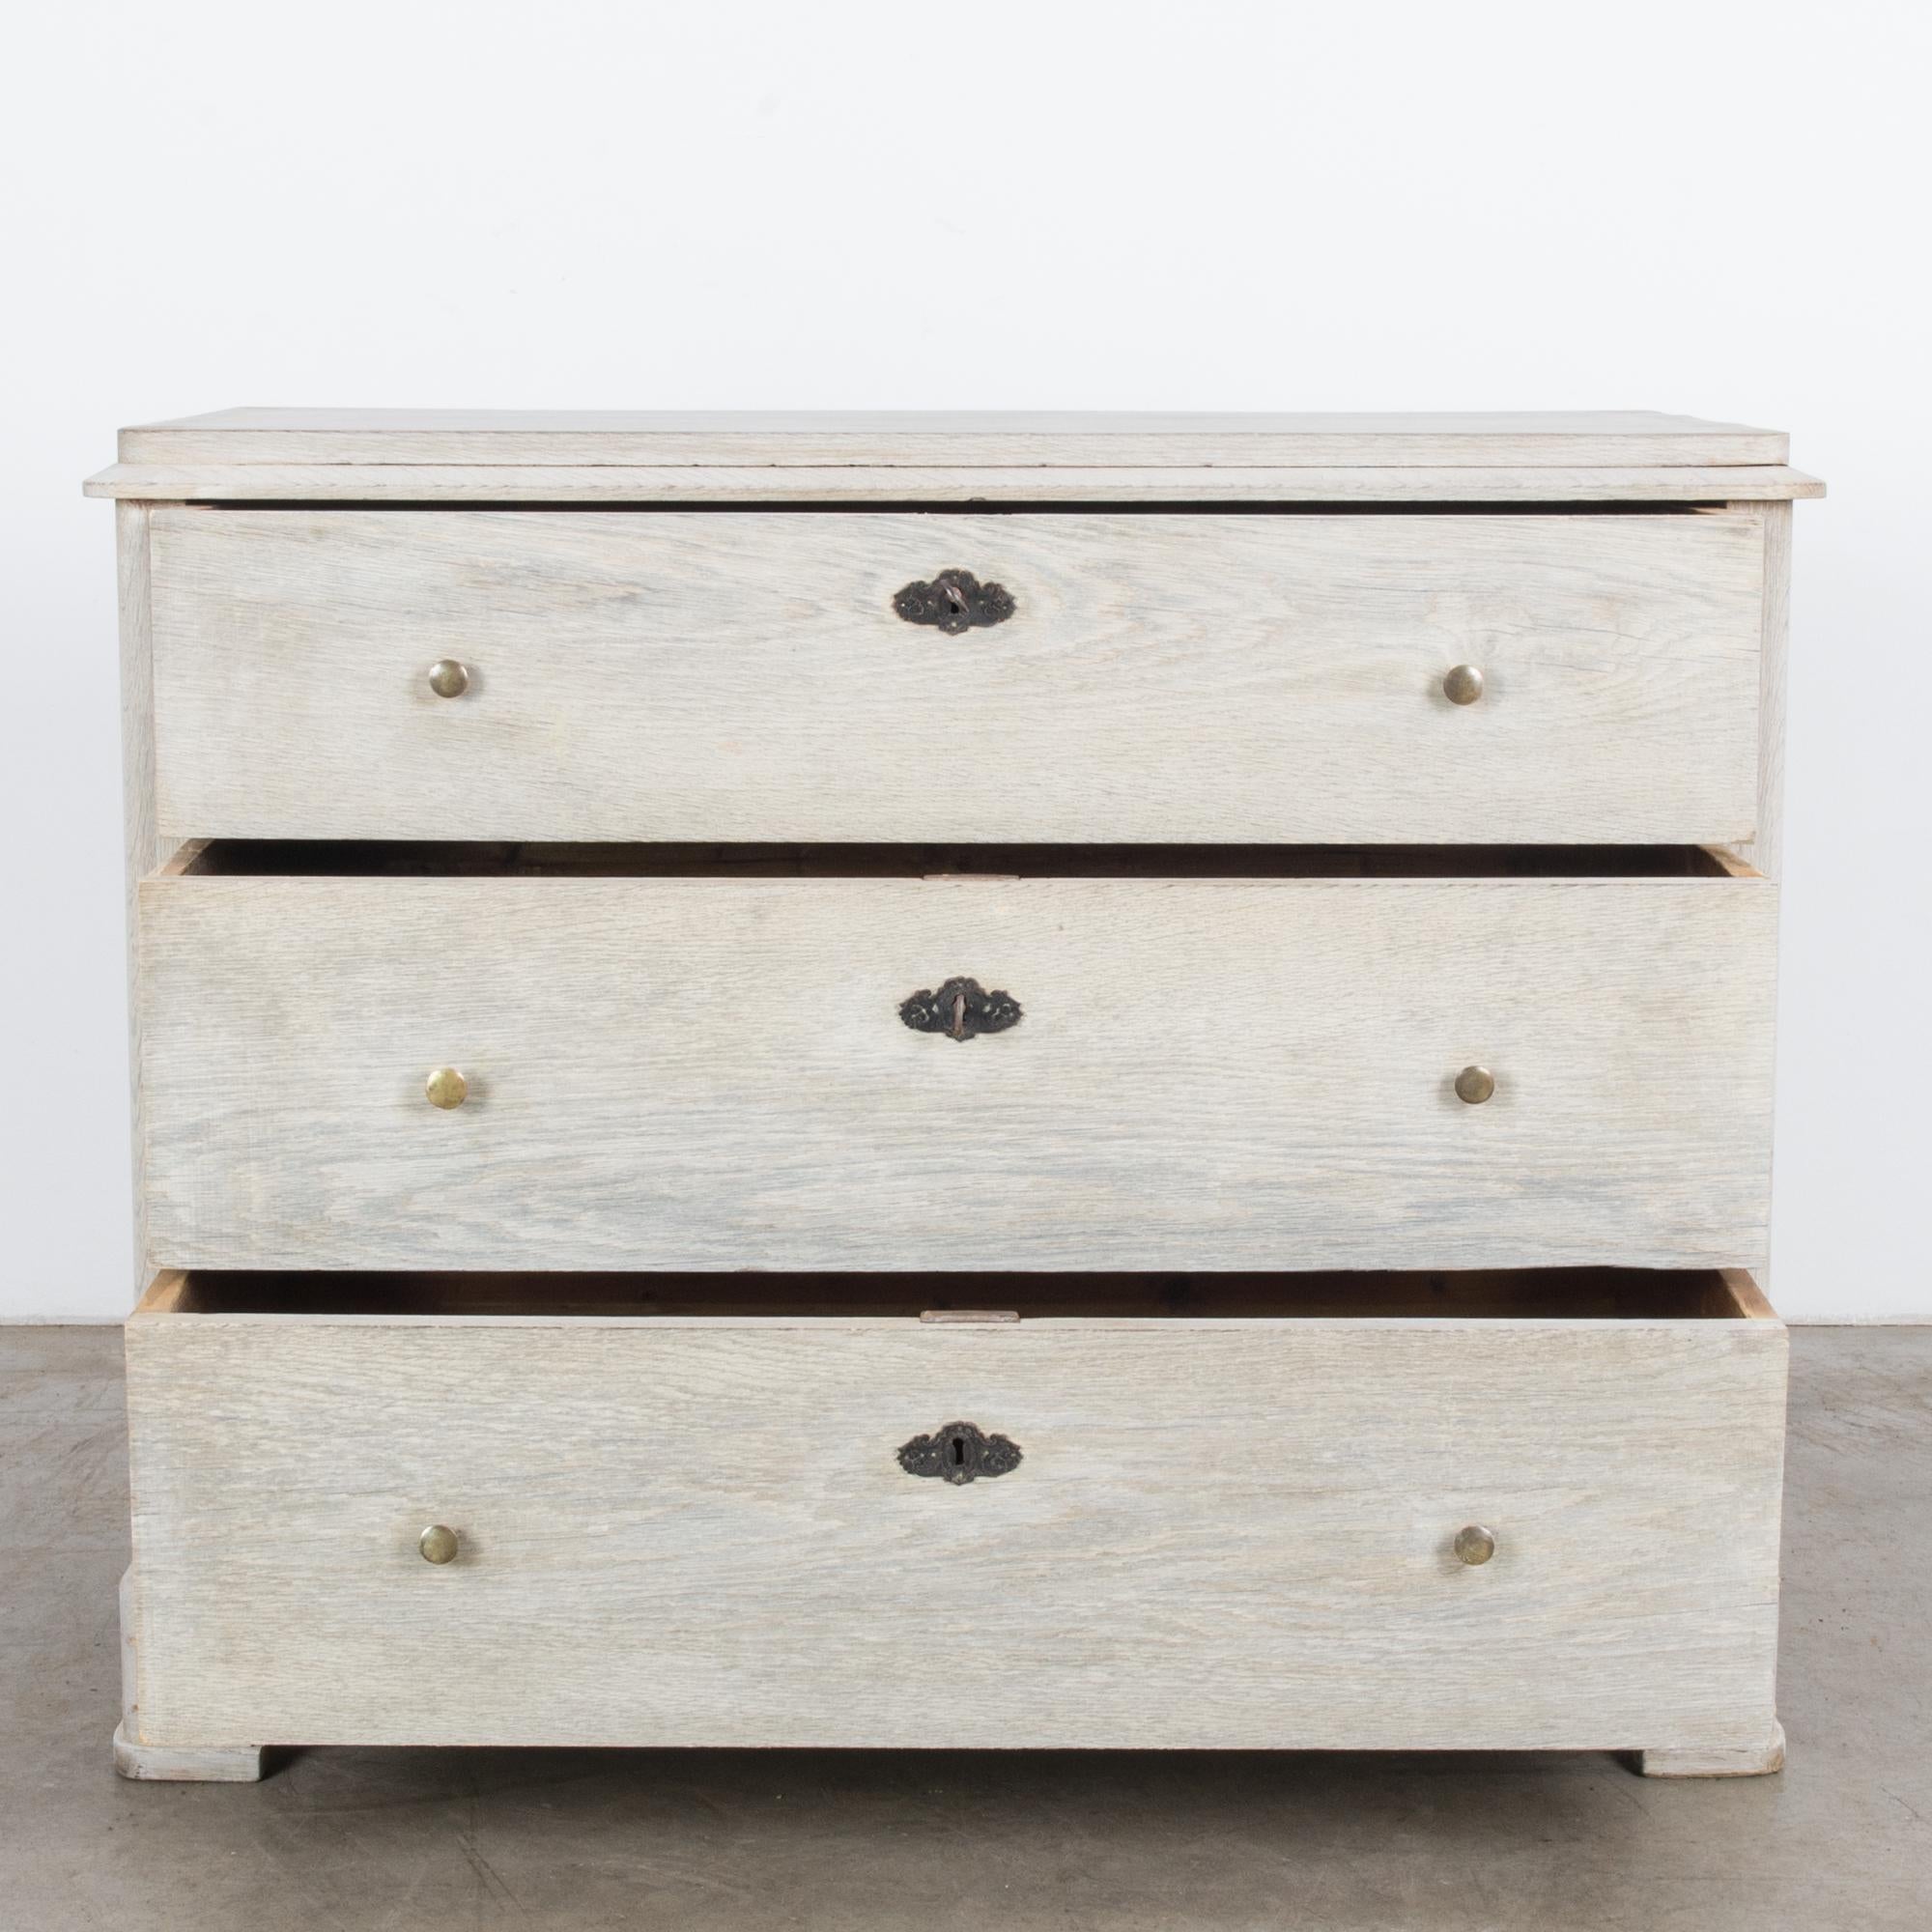 French Provincial 1880s Bleached Oak French Drawer Chest